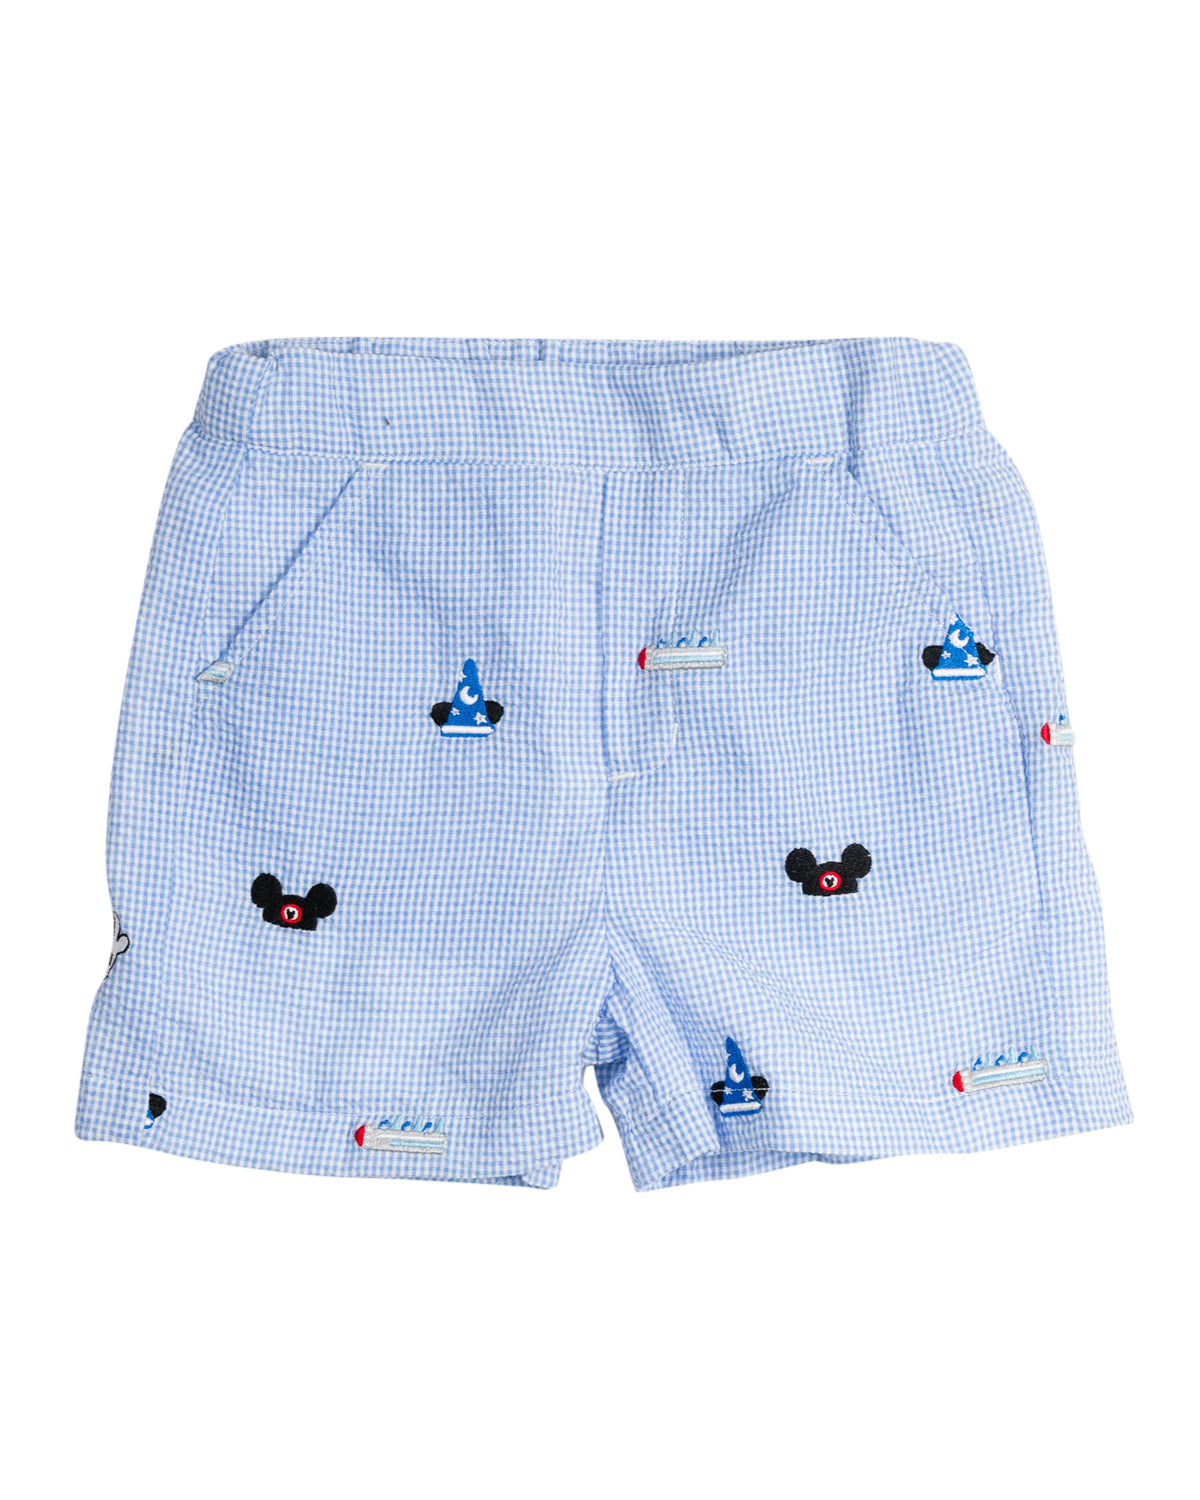 Park Fun Embroidered Shorts